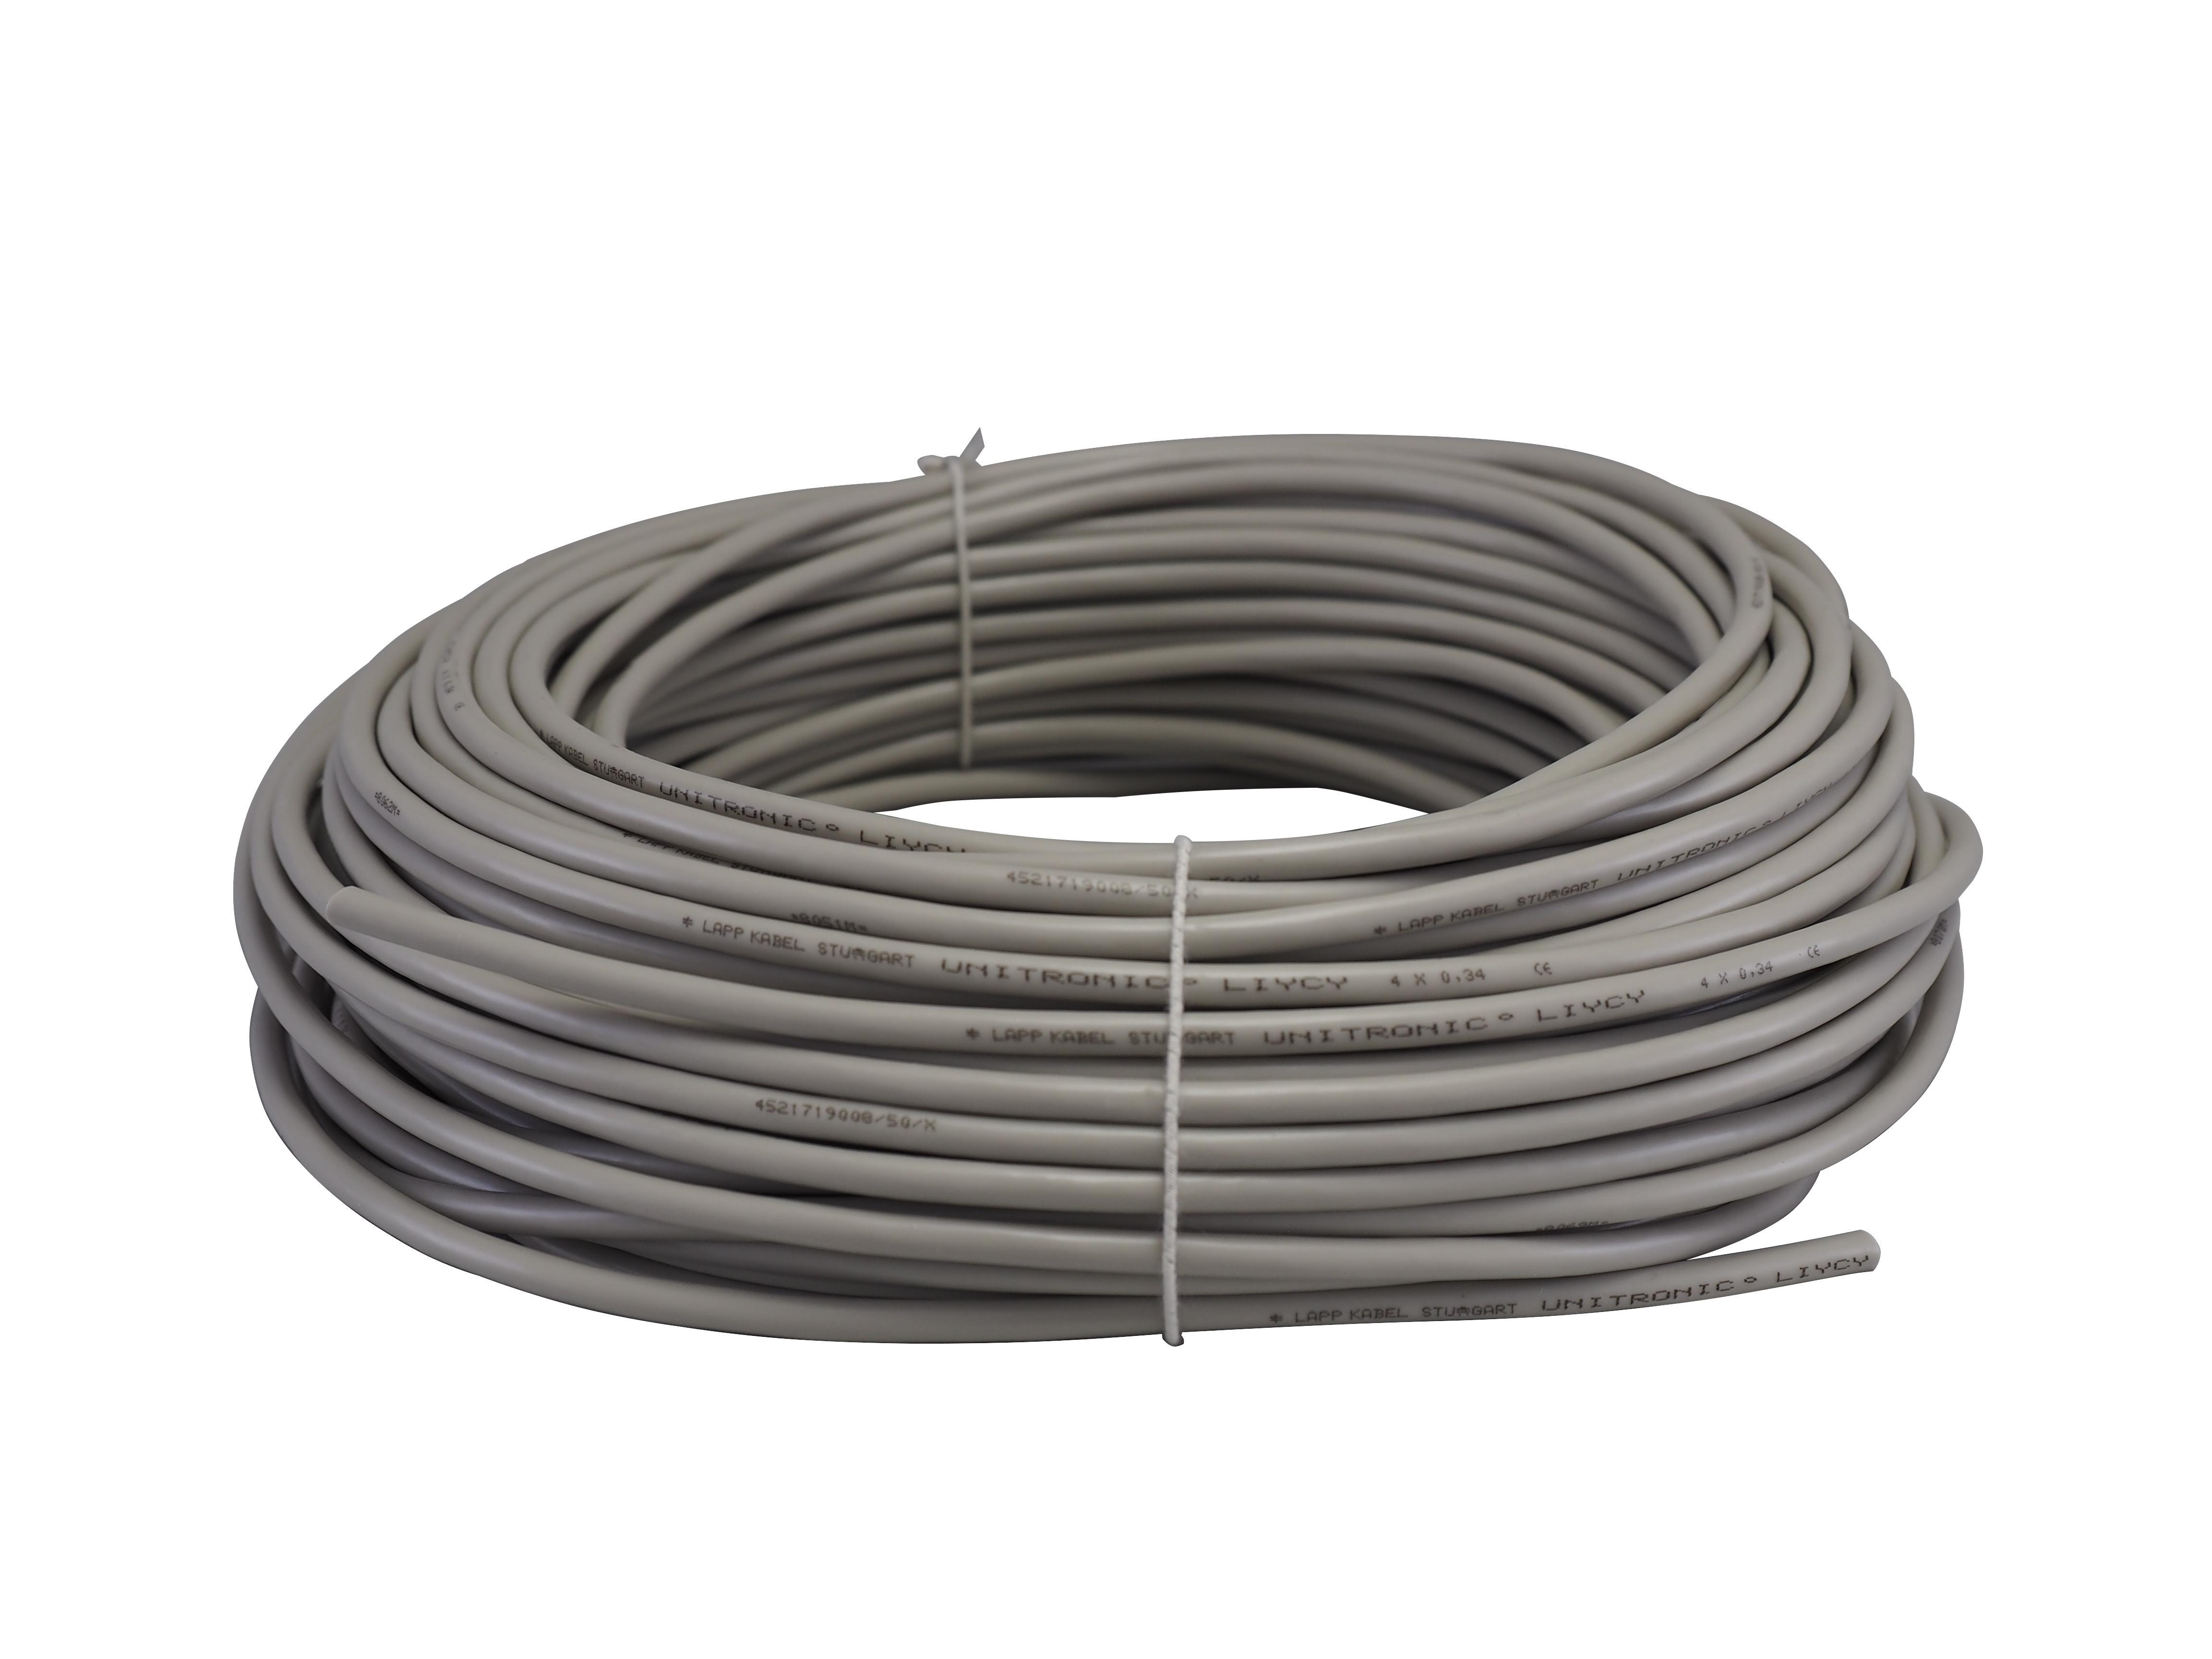 JUMO 50 meter connection cable (4-wire + shield)